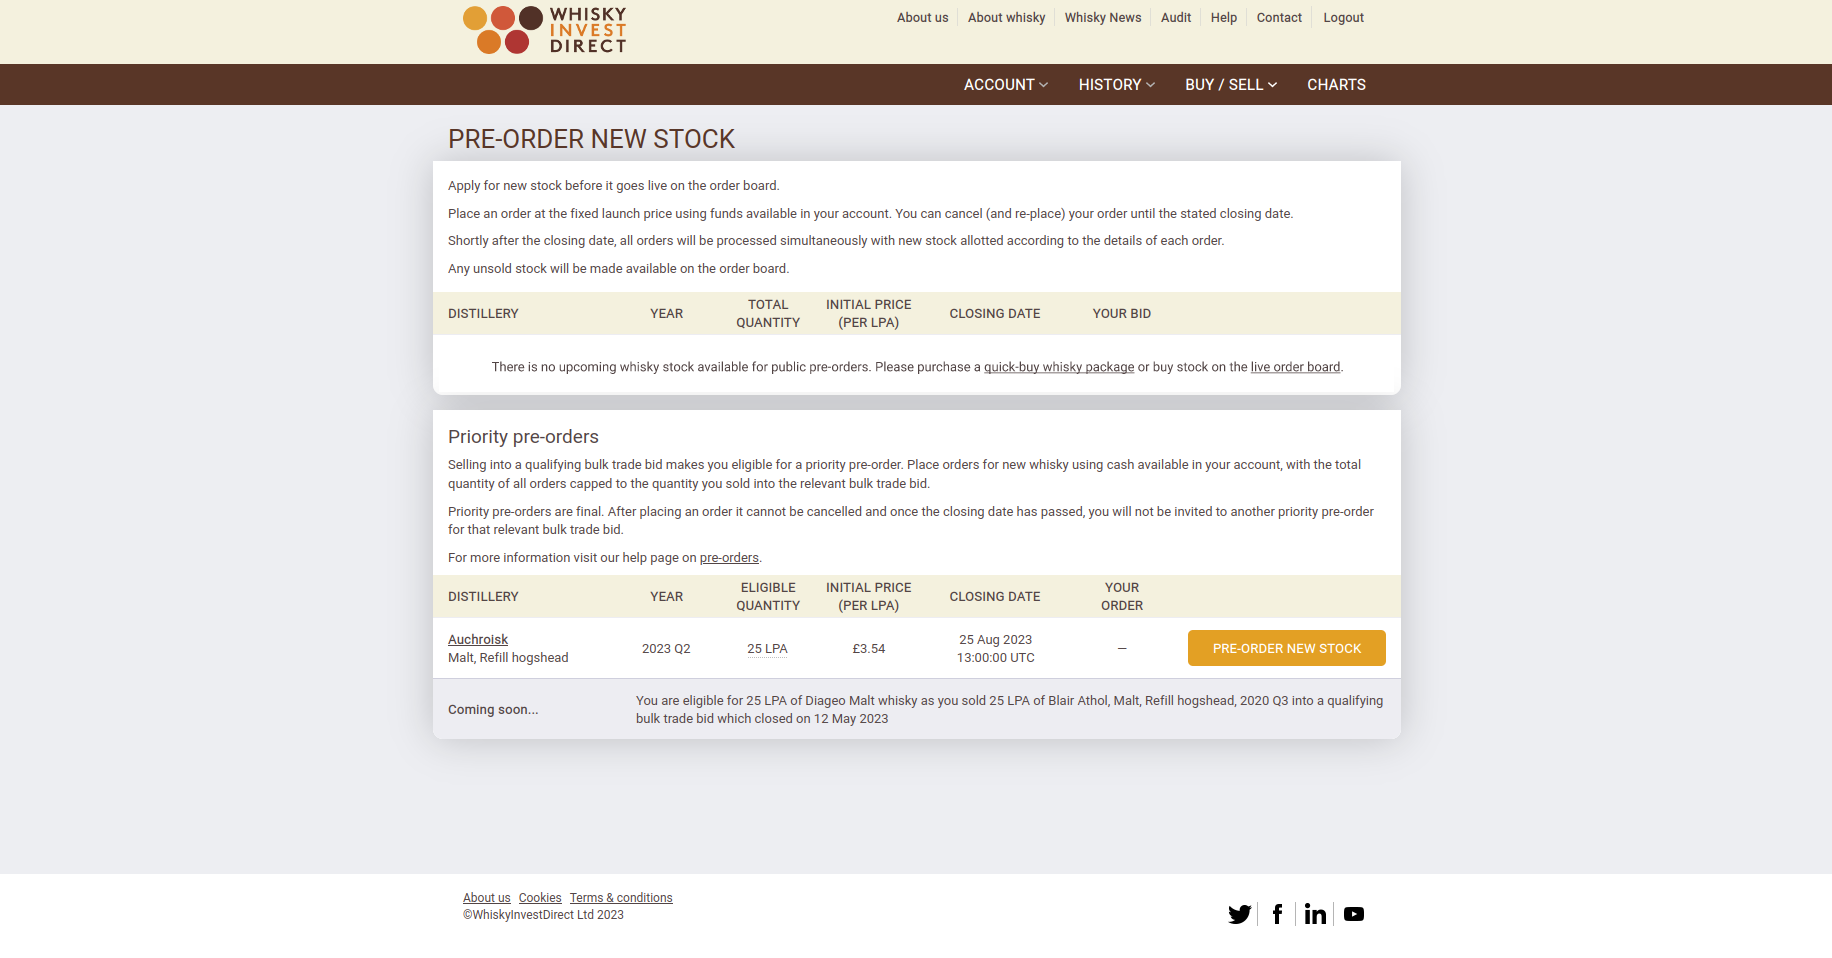 An example screenshot of a client pre-order page, showing a priority pre-order